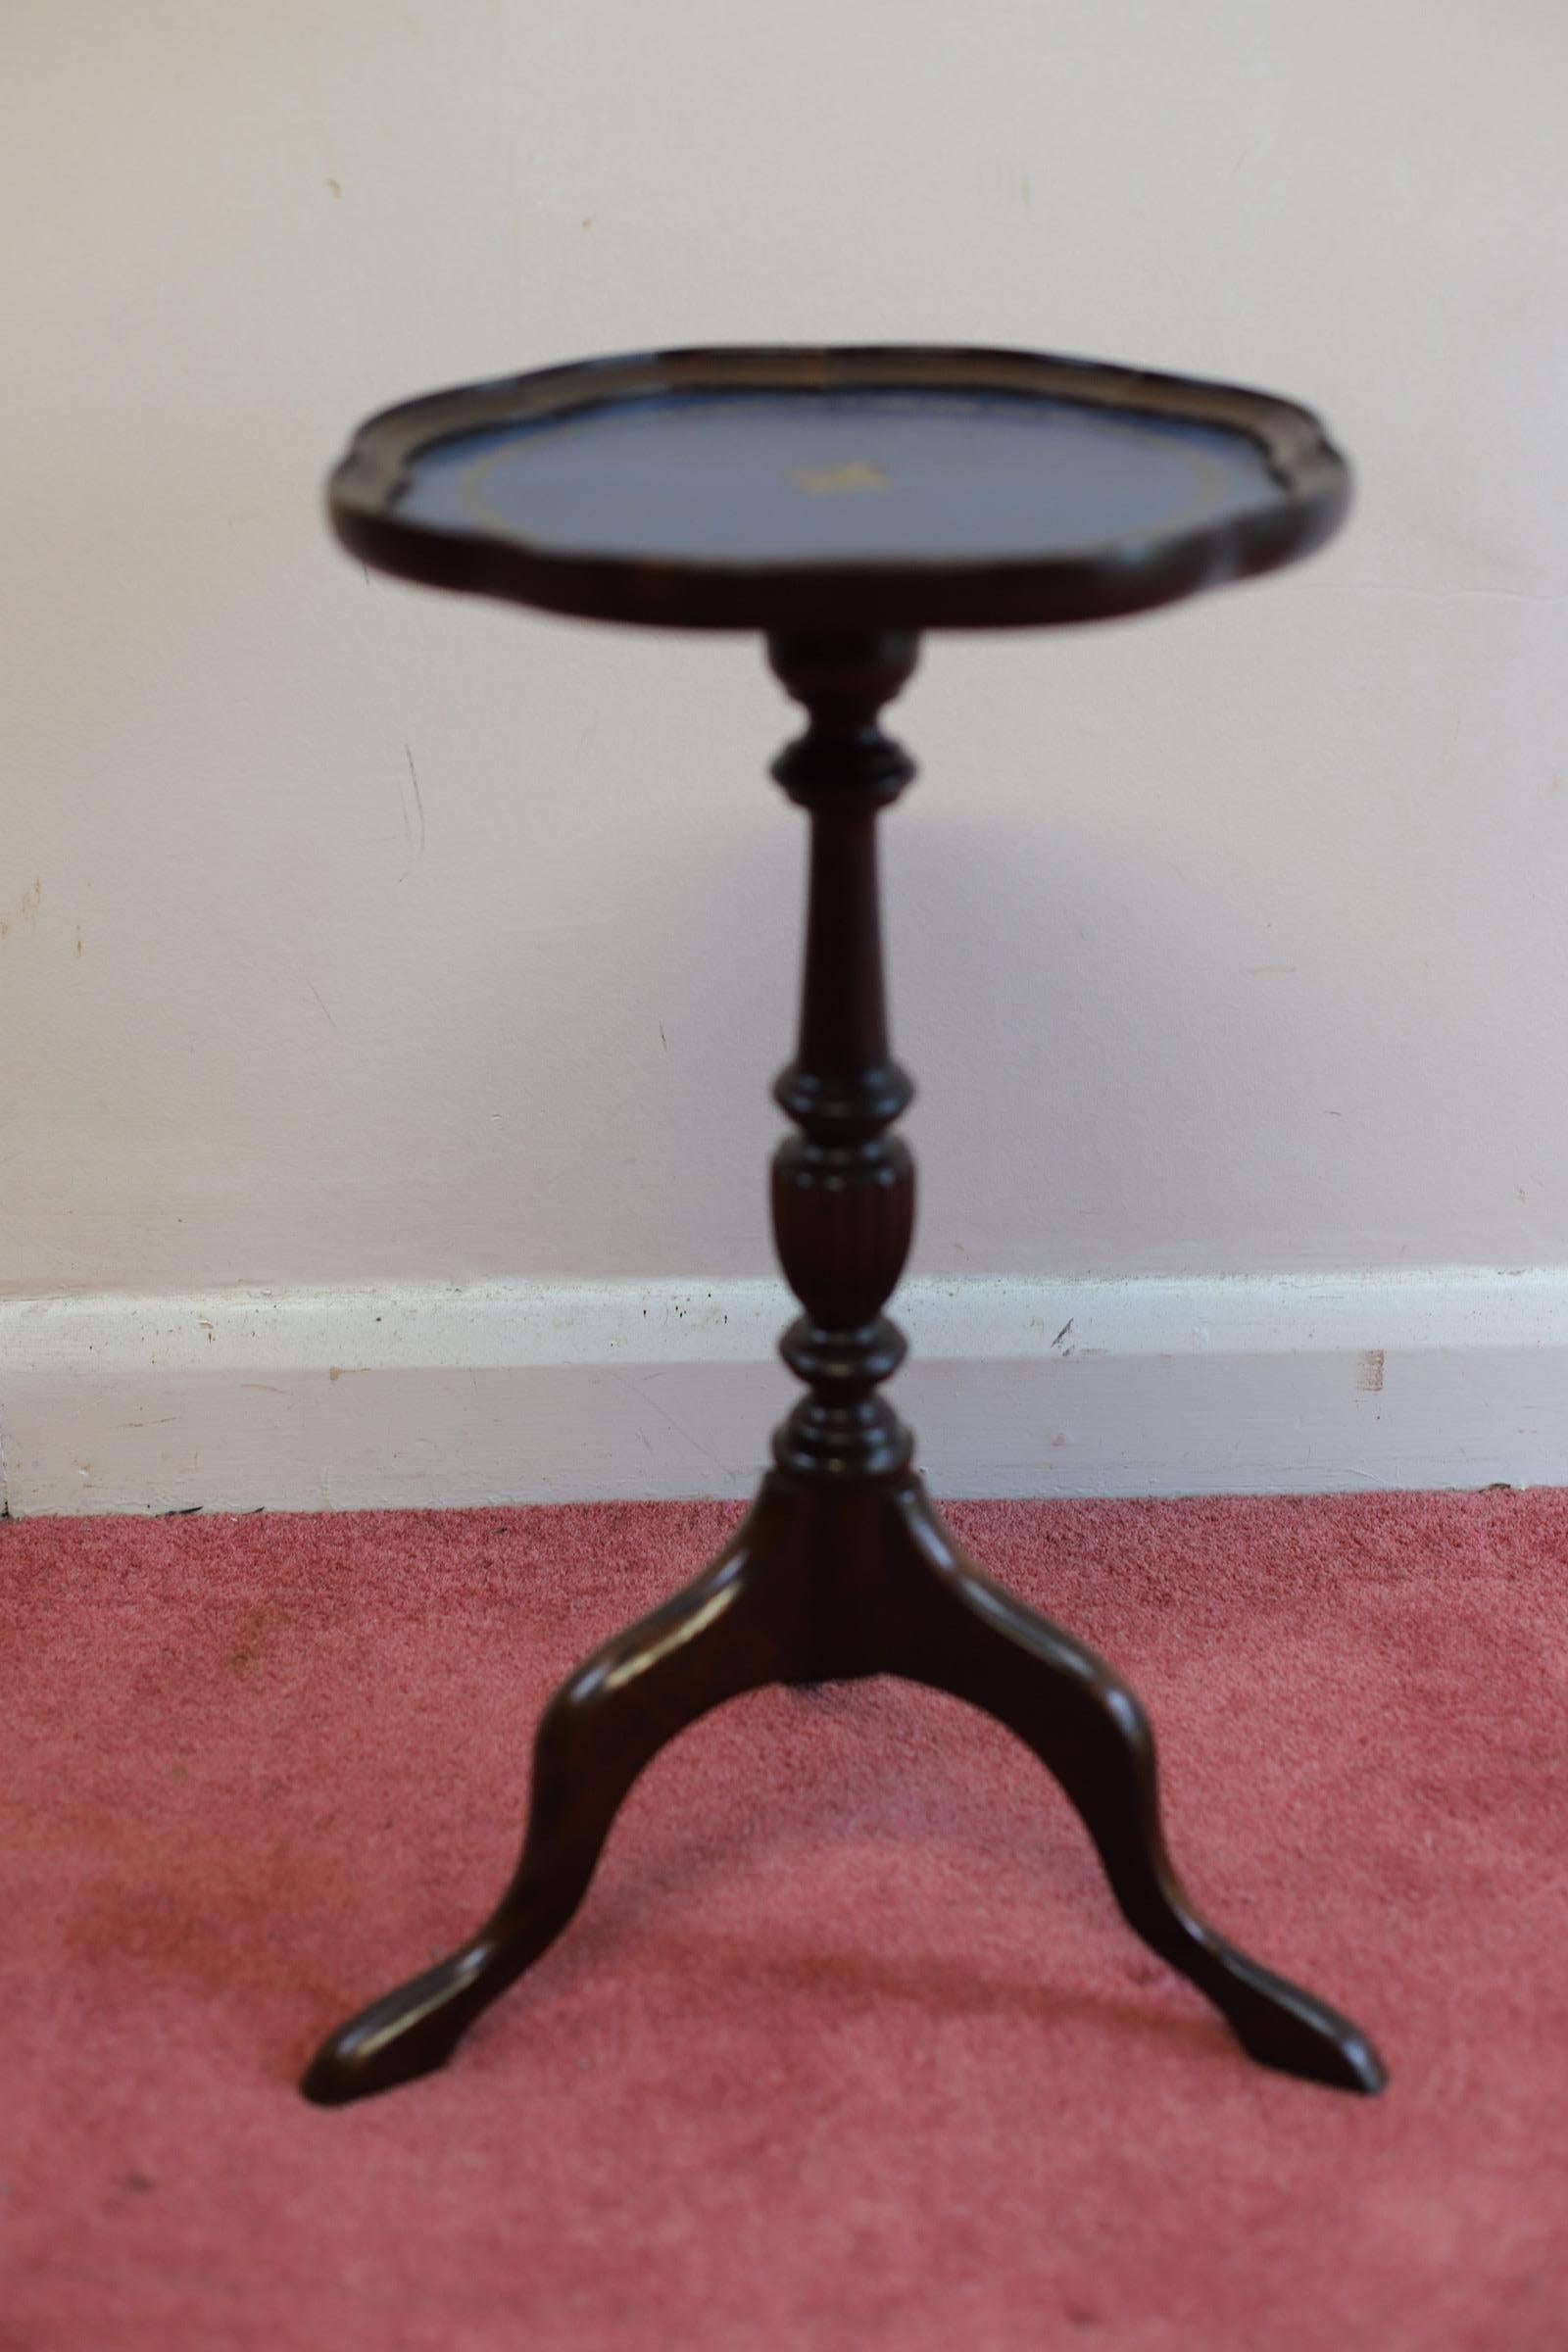 We delight to offer for sale this beautiful vintage oak and lblue leather topped tripod table .
Don't hesitate to contact me if you have any questions.
Please have a closer look at the pictures because they form part of the